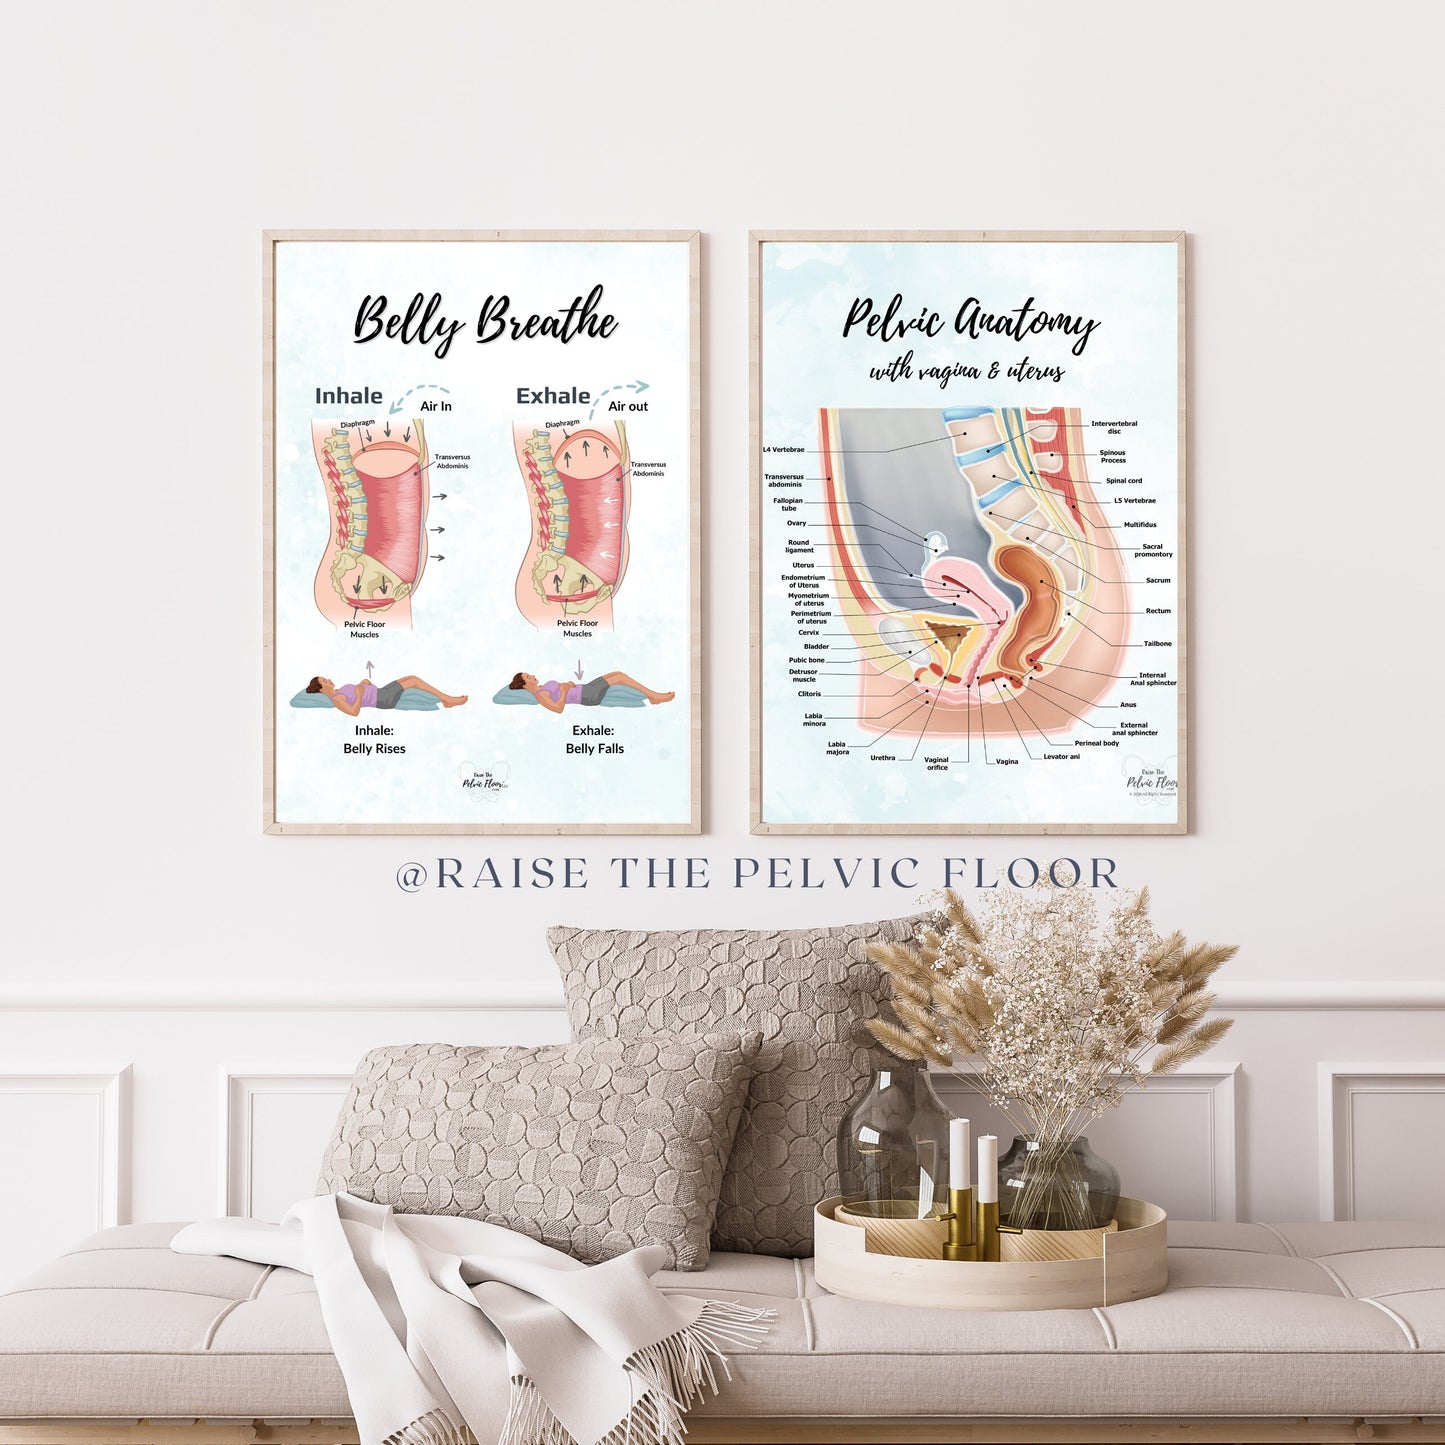 Belly Breathe Pelvic Floor *Digital Download* | Pelvic health artwork of the breath and core for pelvic therapy, meditation, yoga, pilates